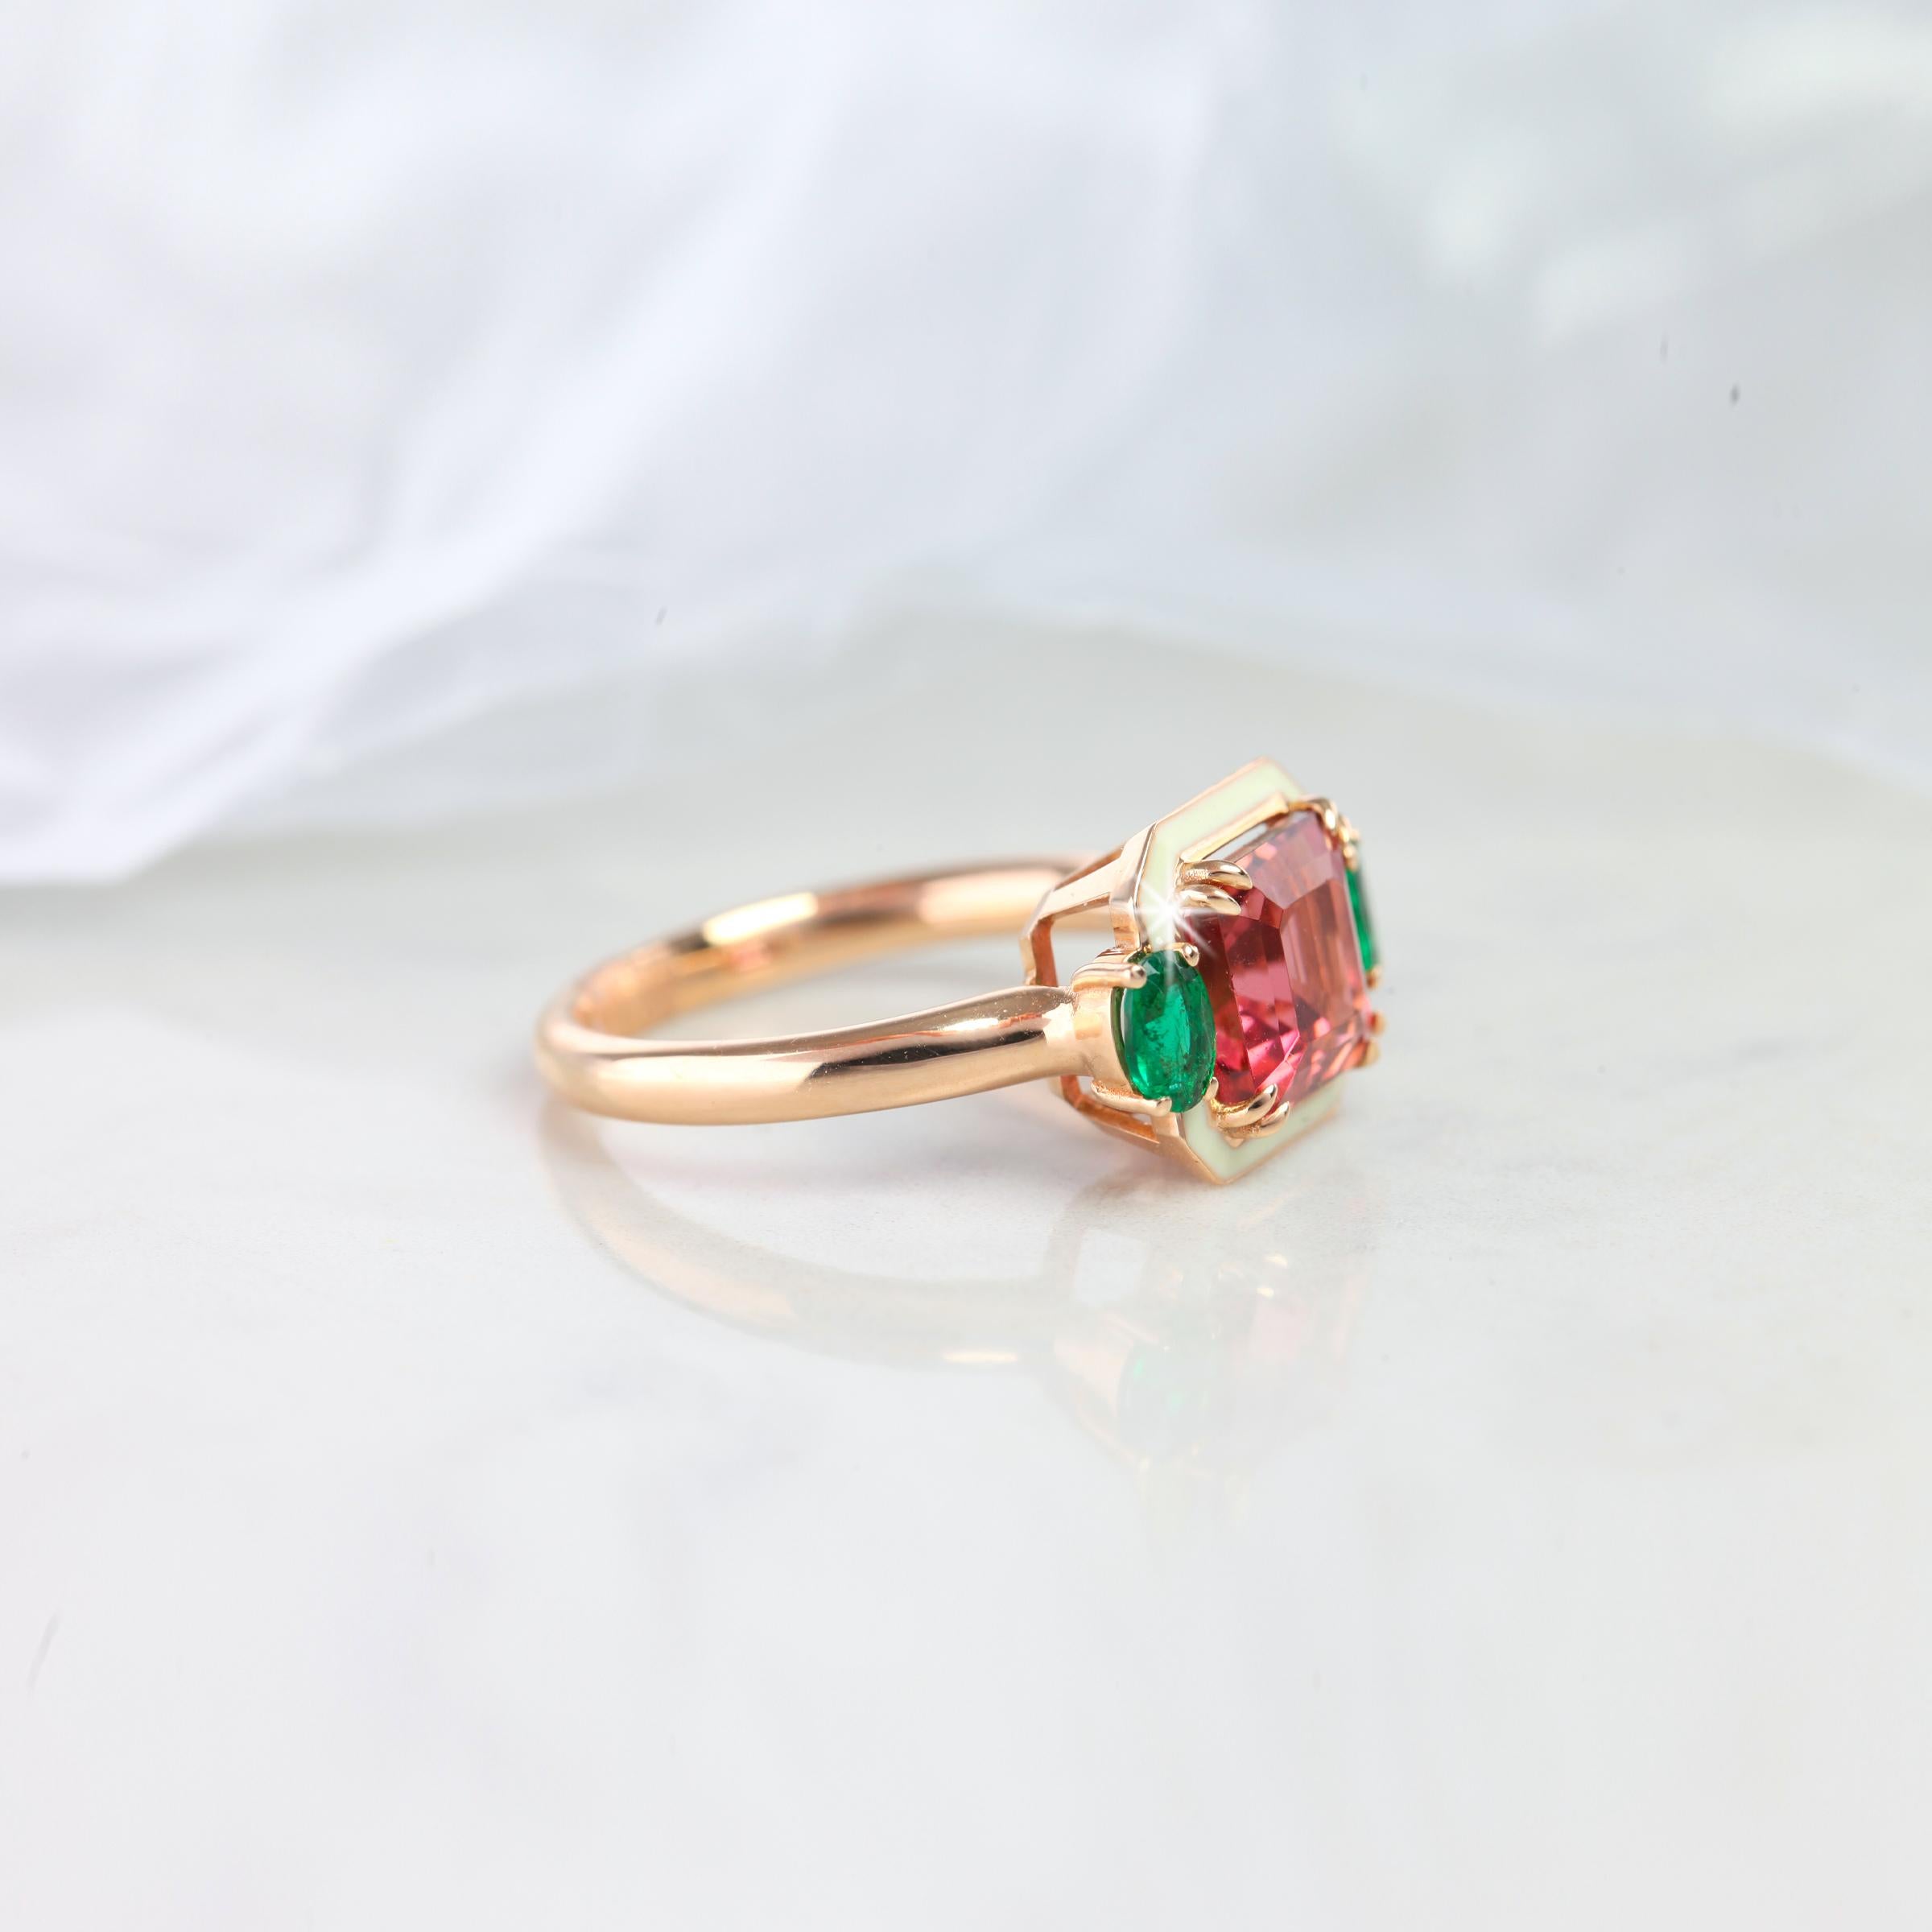 Emerald Cut Tourmaline Ring, Tourmaline and Emerald Fancy Ring - Tourmaline Ring, Emerald Cut Tourmaline Ring, Tourmaline and Emerald Fancy Ring,

Emerald Cut Tourmaline and Oval Cut Emerald Fancy Ring with 14K Solid Rose Gold created by hands with